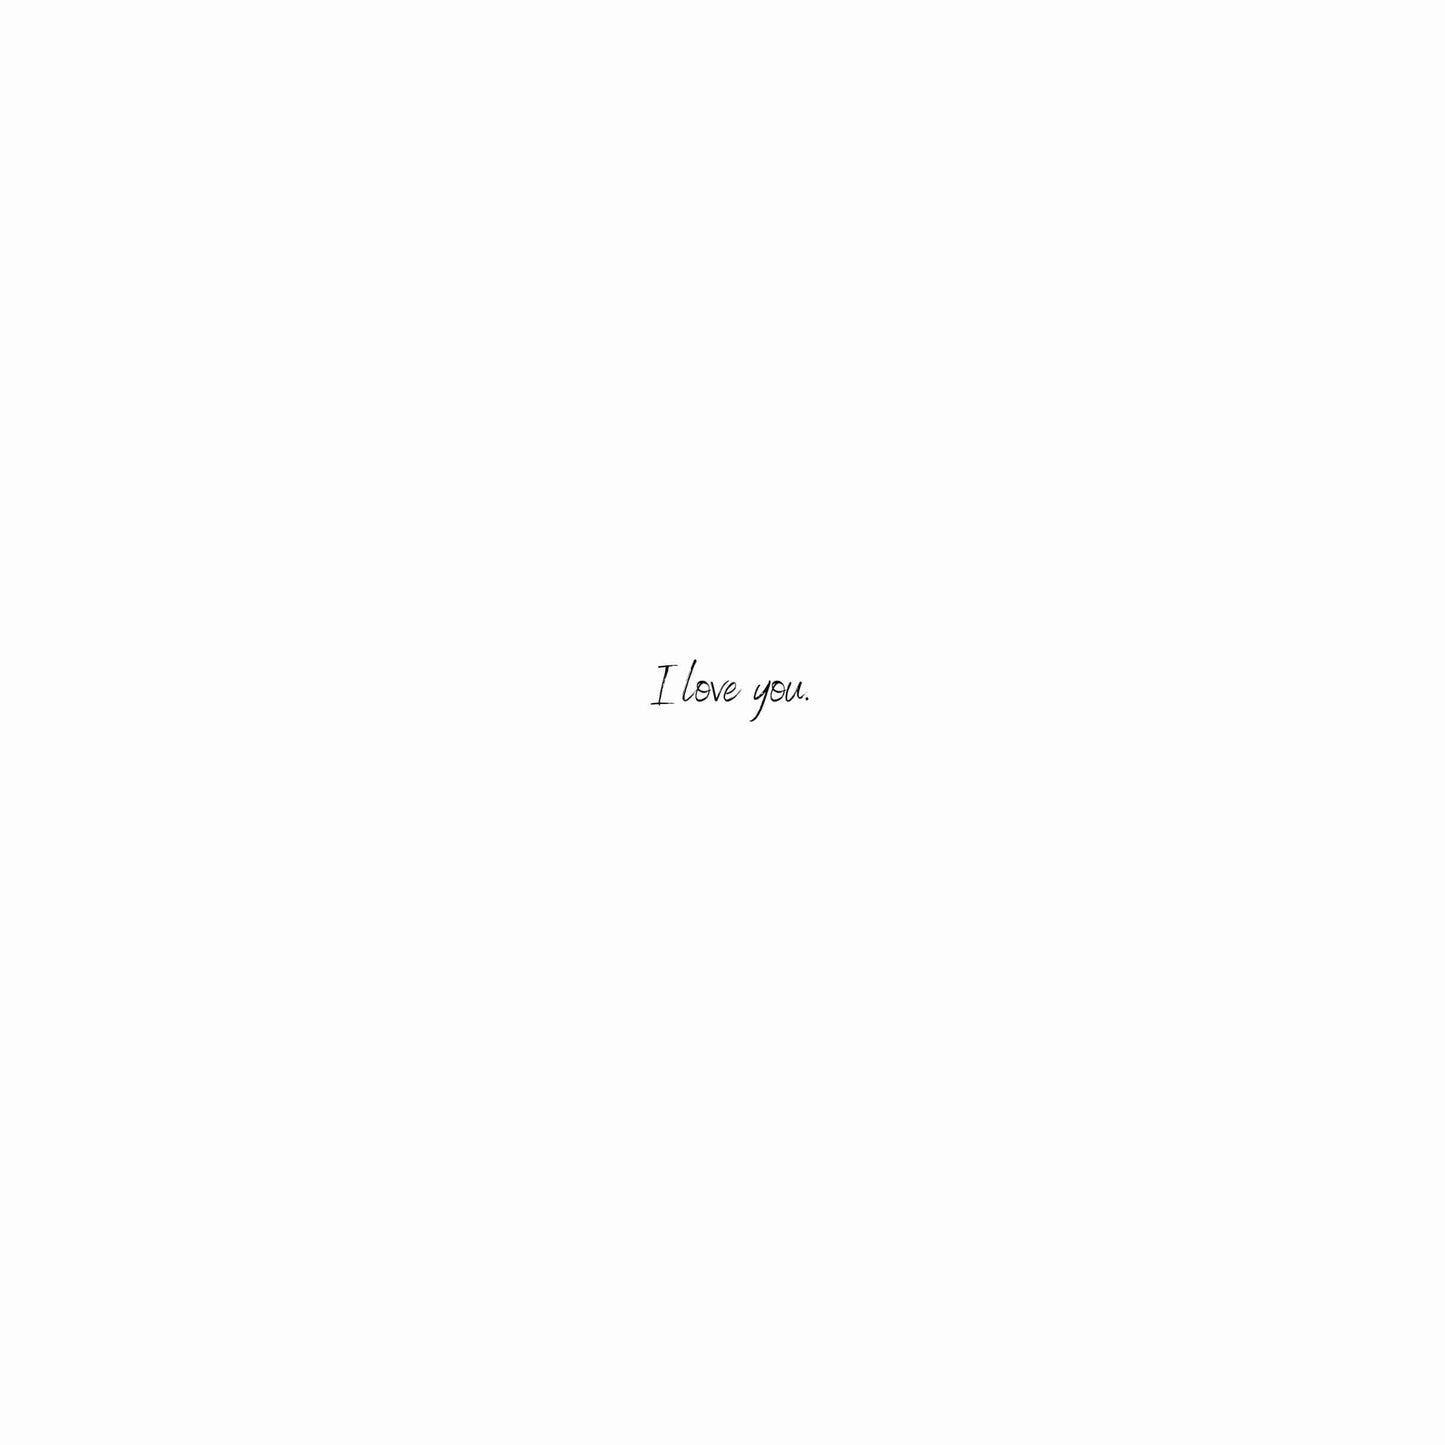 Love Doodles Greeting Card